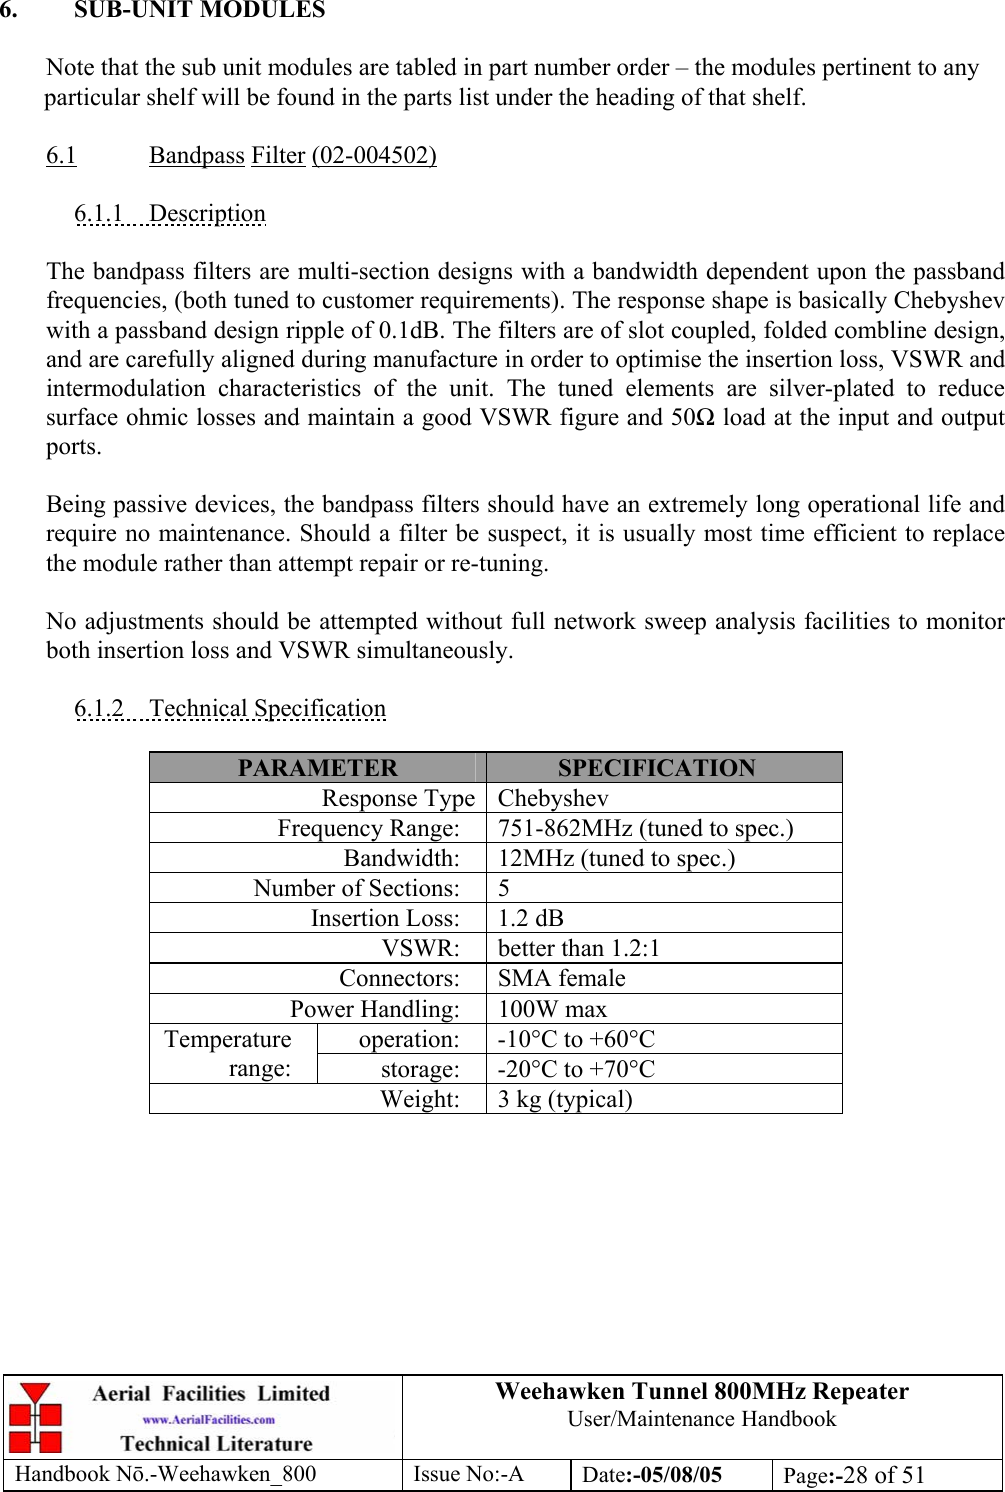 Weehawken Tunnel 800MHz Repeater User/Maintenance Handbook Handbook N.-Weehawken_800 Issue No:-A Date:-05/08/05  Page:-28 of 51   6. SUB-UNIT MODULES  Note that the sub unit modules are tabled in part number order – the modules pertinent to any particular shelf will be found in the parts list under the heading of that shelf.  6.1 Bandpass Filter (02-004502)  6.1.1 Description  The bandpass filters are multi-section designs with a bandwidth dependent upon the passband frequencies, (both tuned to customer requirements). The response shape is basically Chebyshev with a passband design ripple of 0.1dB. The filters are of slot coupled, folded combline design, and are carefully aligned during manufacture in order to optimise the insertion loss, VSWR and intermodulation characteristics of the unit. The tuned elements are silver-plated to reduce surface ohmic losses and maintain a good VSWR figure and 50 load at the input and output ports.  Being passive devices, the bandpass filters should have an extremely long operational life and require no maintenance. Should a filter be suspect, it is usually most time efficient to replace the module rather than attempt repair or re-tuning.  No adjustments should be attempted without full network sweep analysis facilities to monitor both insertion loss and VSWR simultaneously.  6.1.2 Technical Specification  PARAMETER  SPECIFICATION Response Type Chebyshev Frequency Range:  751-862MHz (tuned to spec.) Bandwidth:  12MHz (tuned to spec.) Number of Sections:  5 Insertion Loss:  1.2 dB VSWR:  better than 1.2:1 Connectors: SMA female Power Handling:  100W max operation:  -10°C to +60°C Temperature range:  storage:  -20°C to +70°C Weight:  3 kg (typical)  